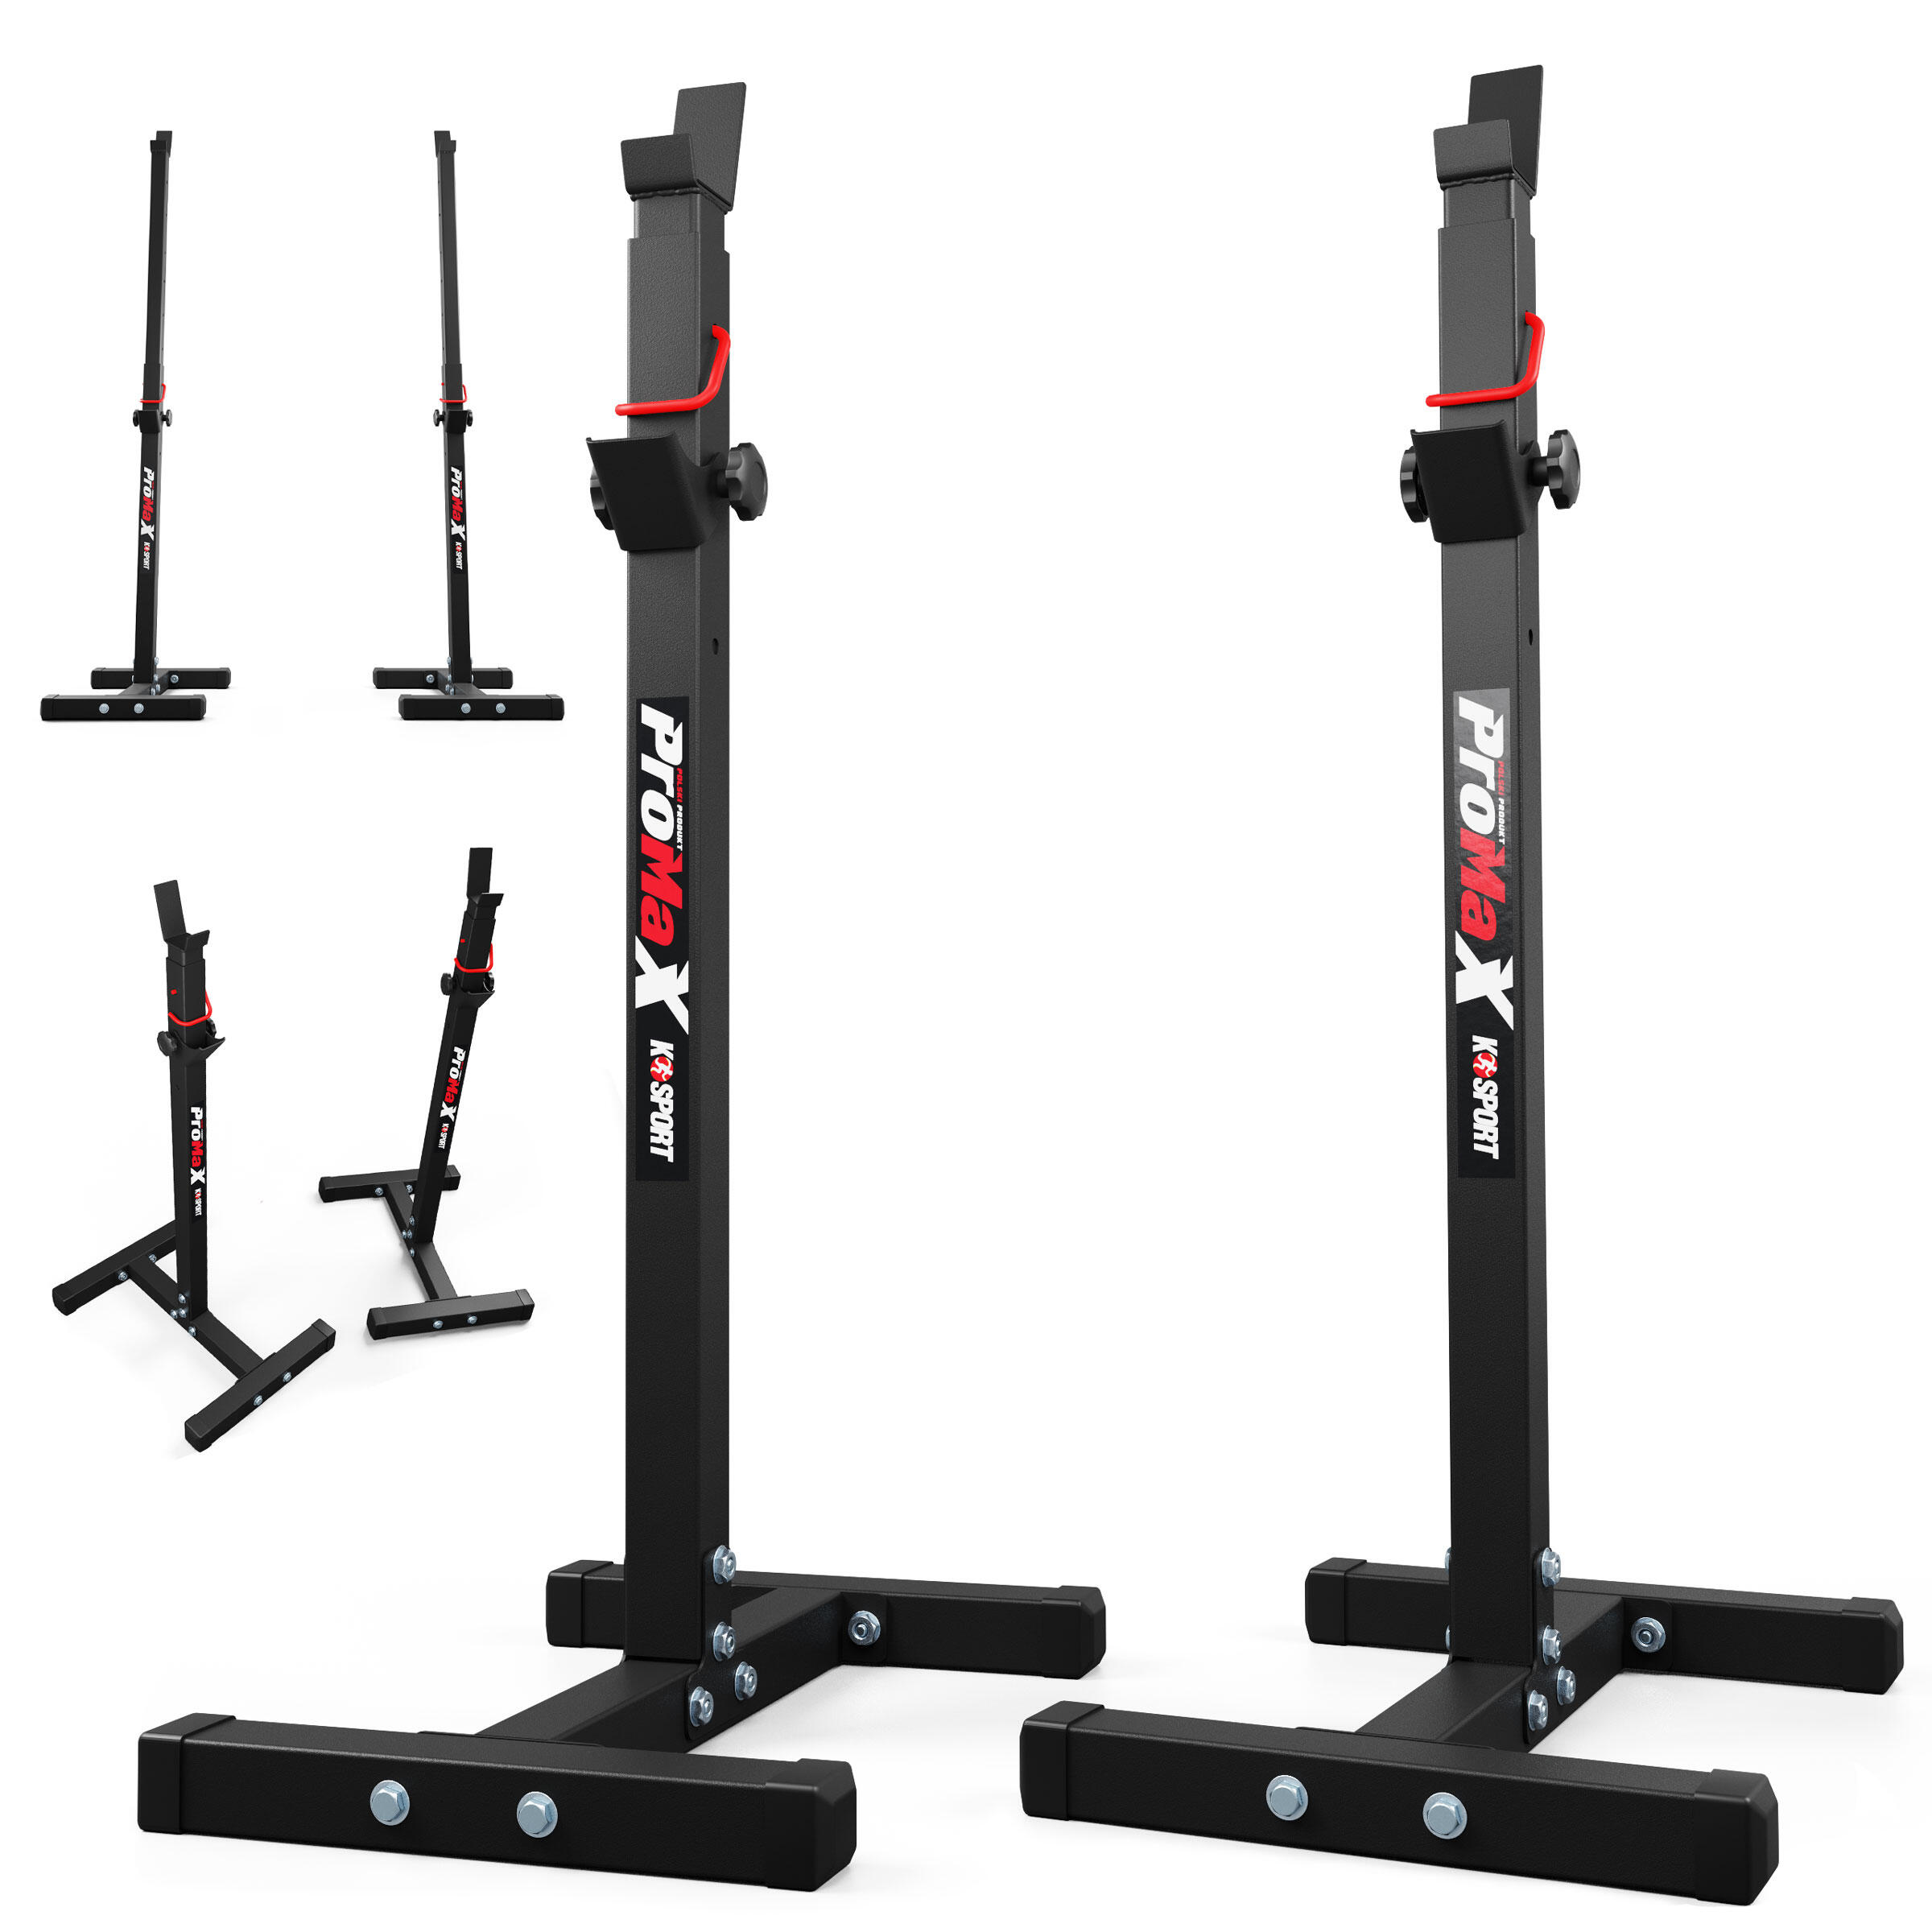 K-SPORT Adjustable Squat Rack Weight Lifting Barbell Stand